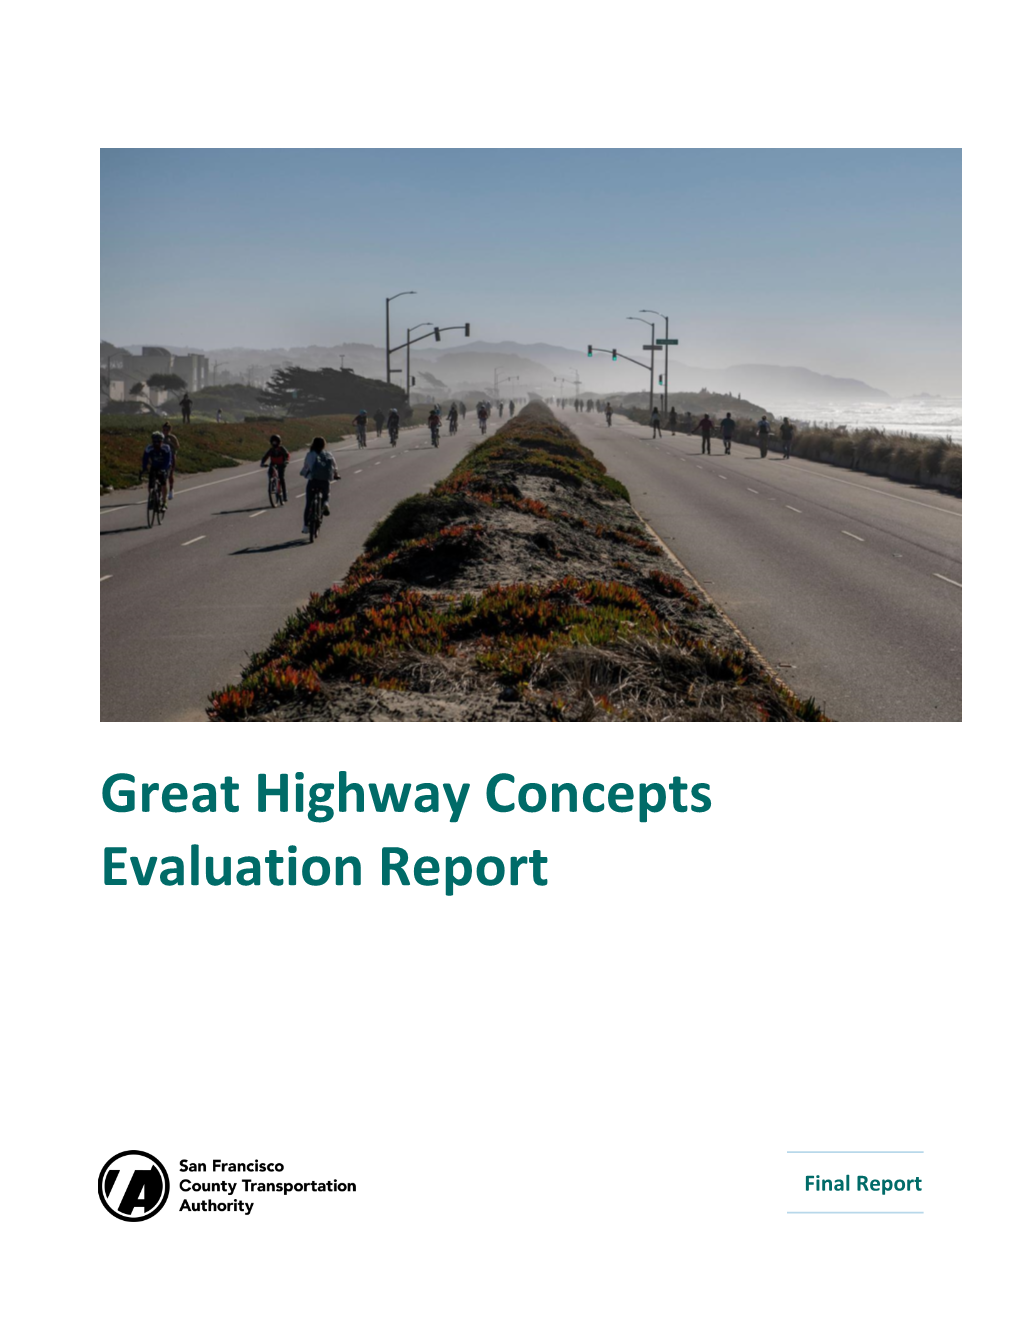 Great Highway Concepts Evaluation Report